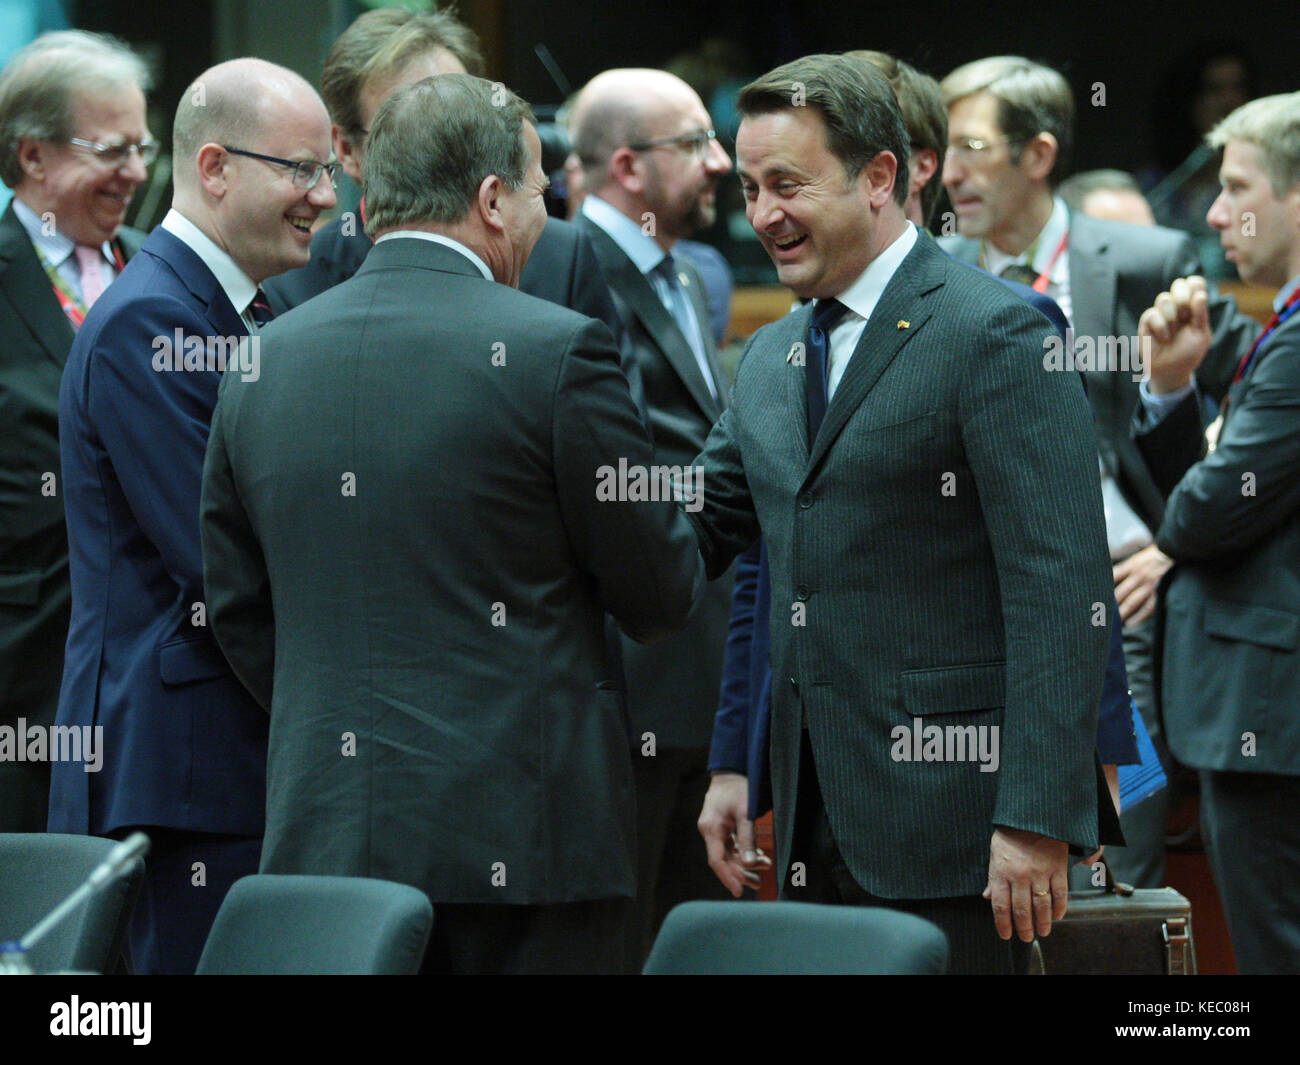 Brussels, Belgium. 19th Oct, 2017. Xavier Bettel Prime Minister of Luxembourg and Stefan Lofven Prime Minister of Sweden, at the European Council, during tehe round table. Credit: Leo Cavallo/Alamy Live News Stock Photo